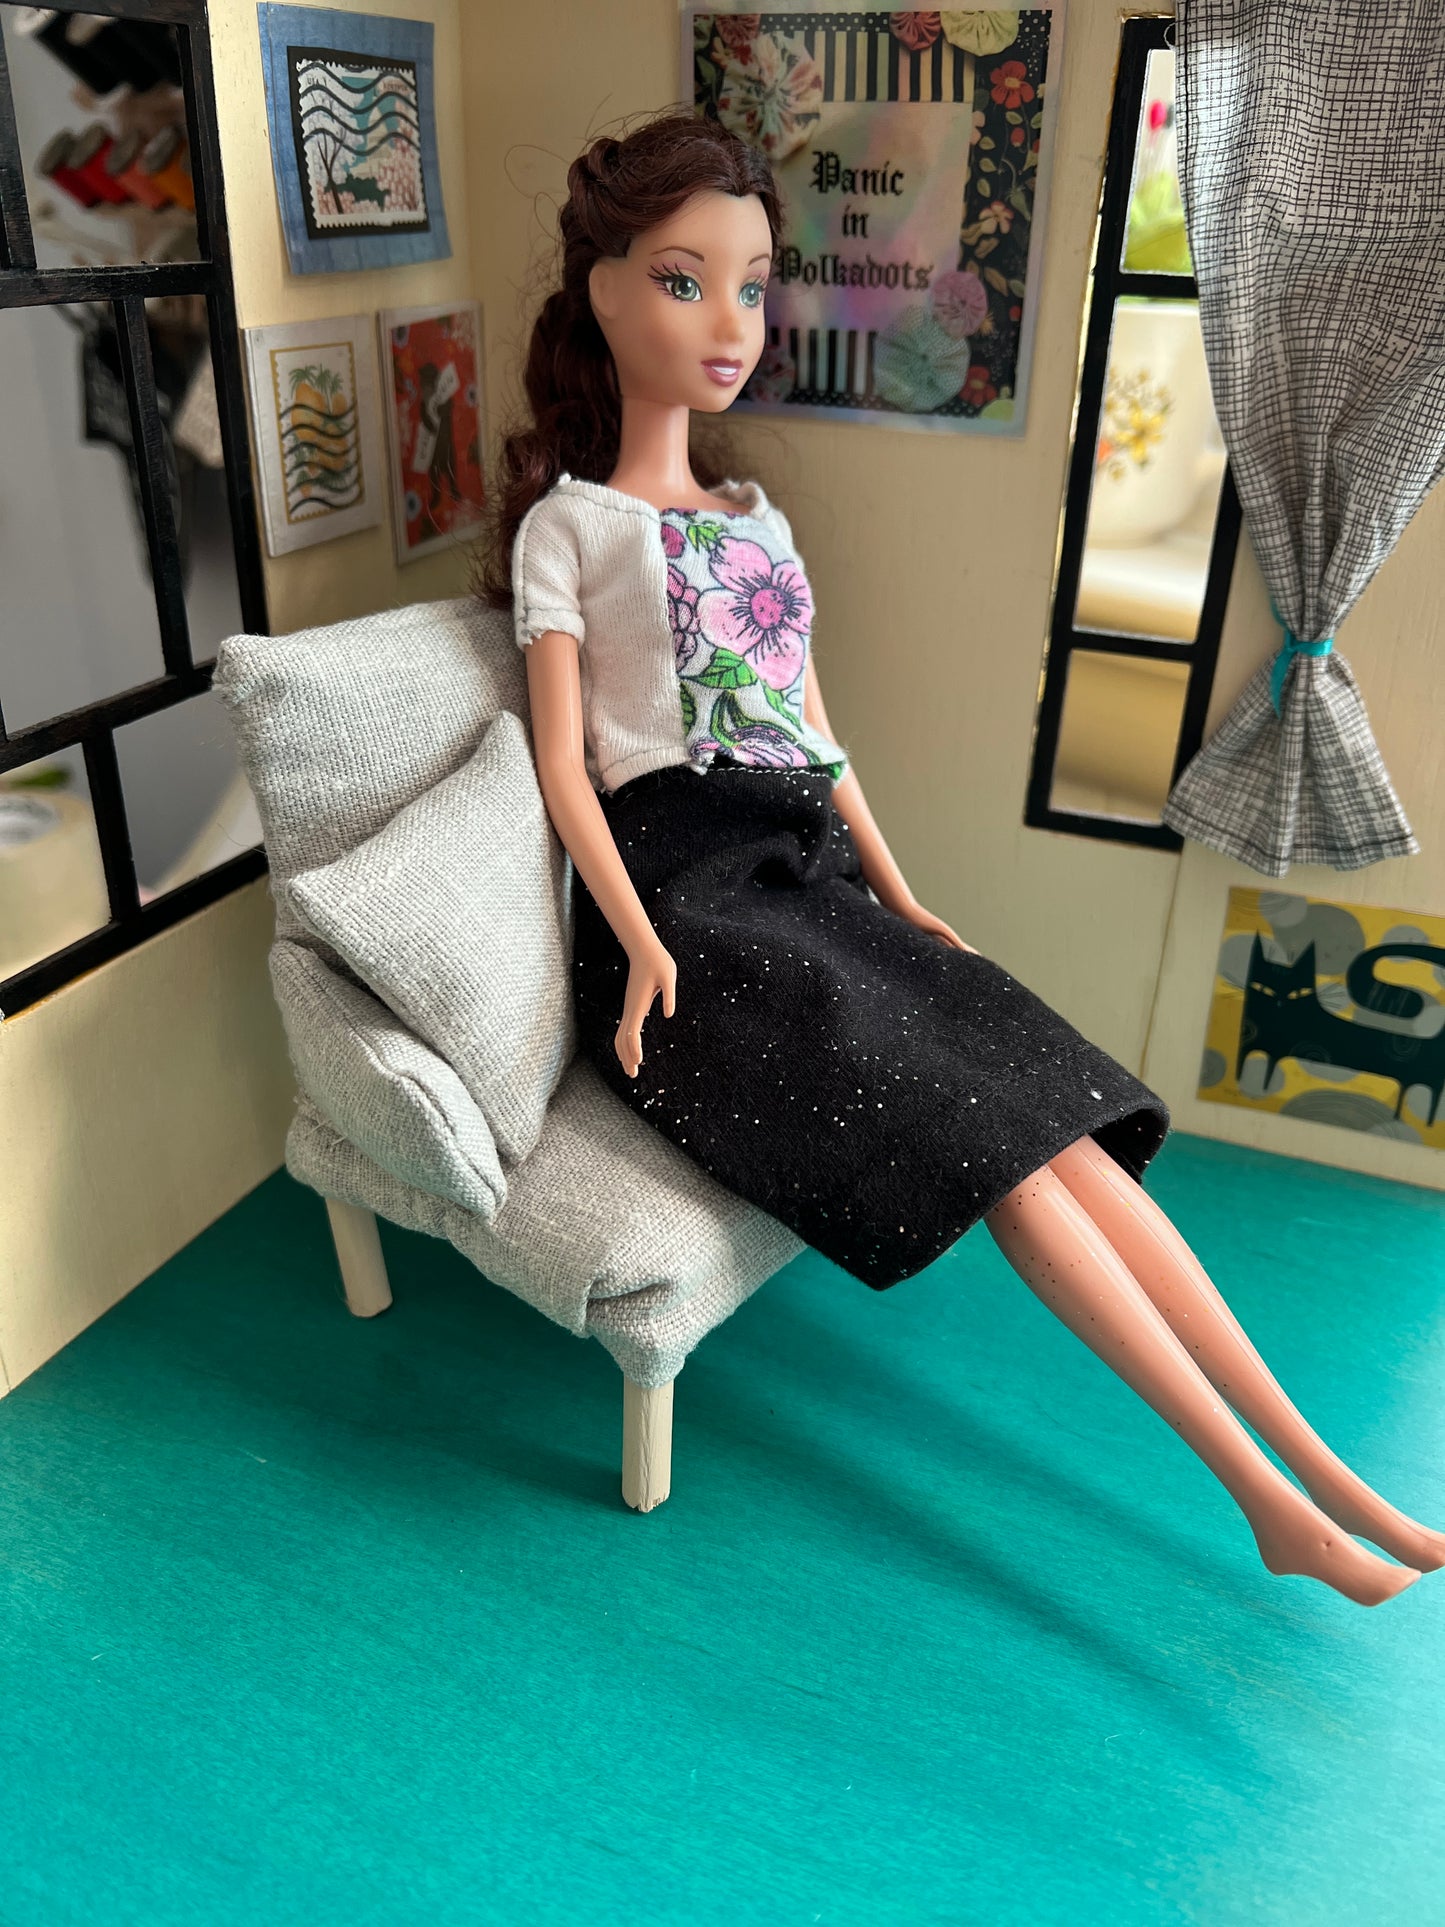 Barbie Dollhouse Furniture 1:6 Scale - Handmade With Upcycled Materials